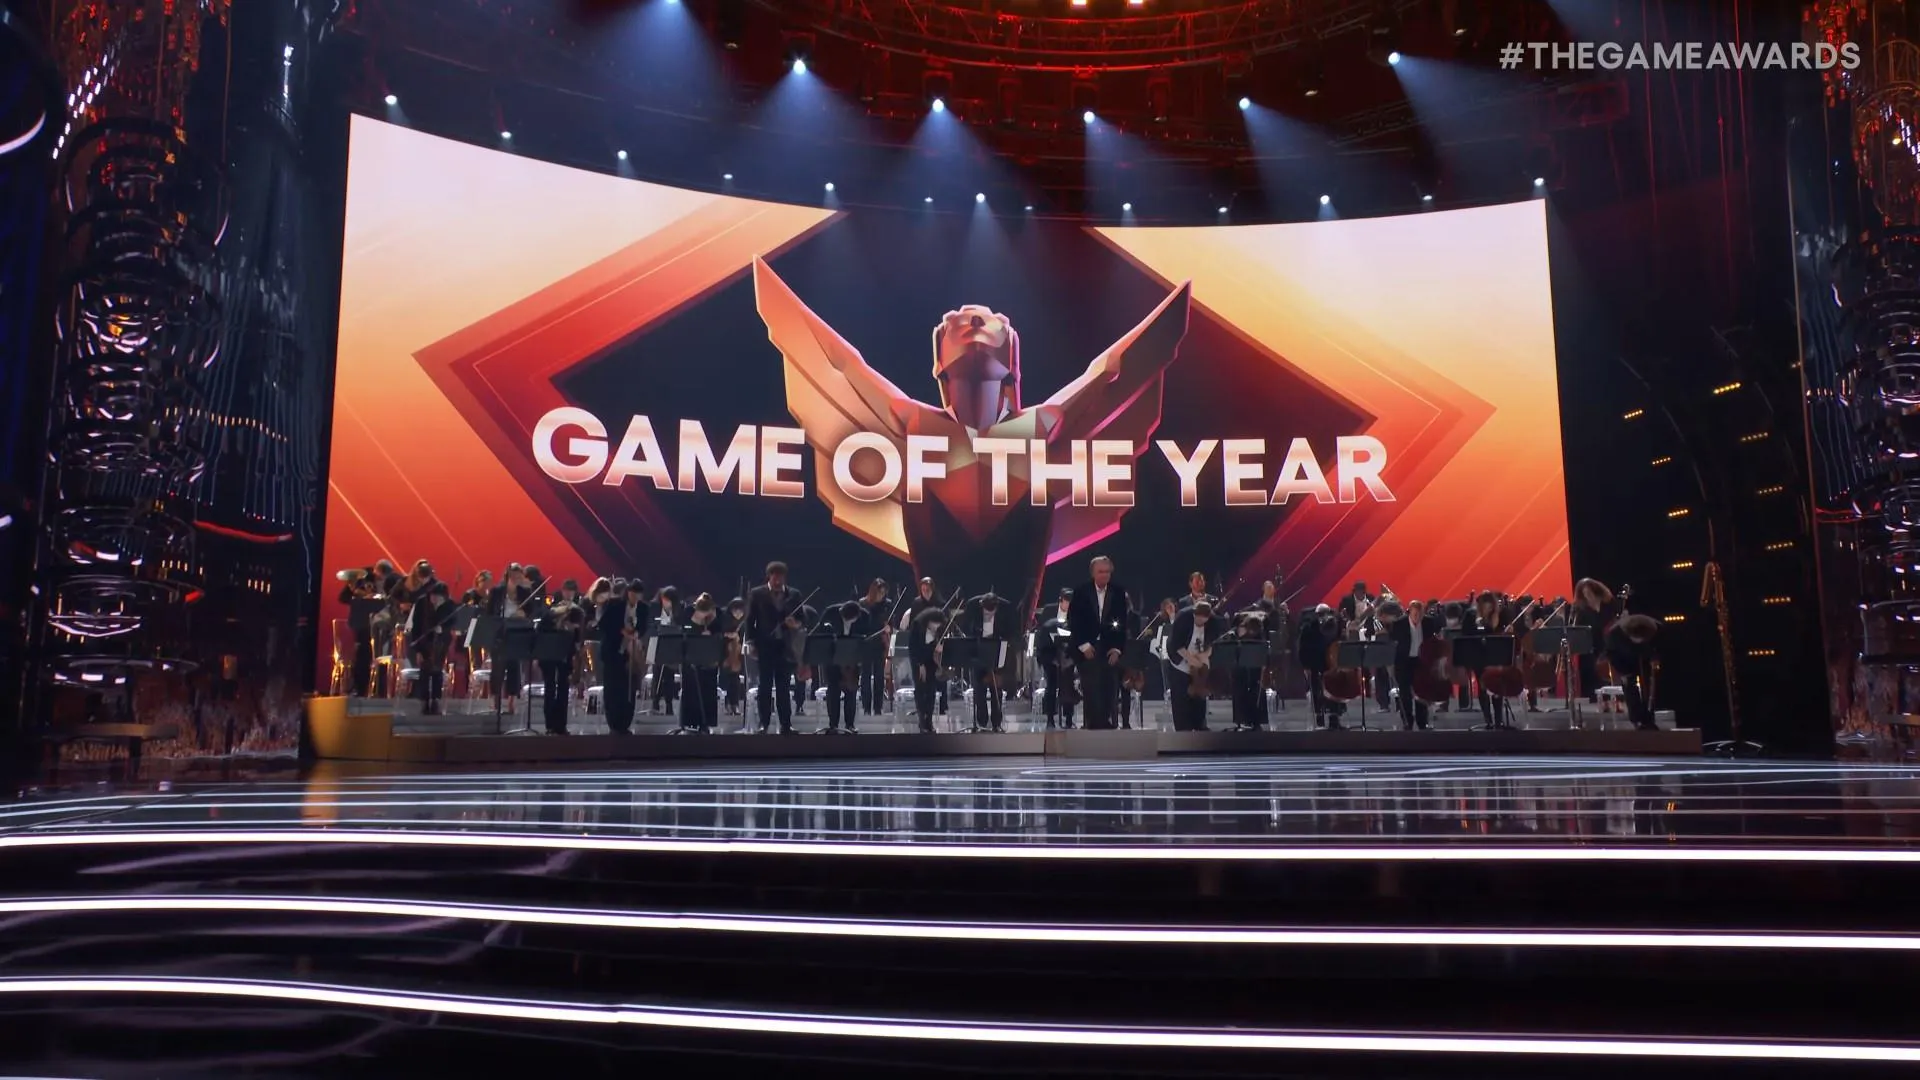 Baldur's Gate 3 Wins Game of the Year at The Game Awards 2023